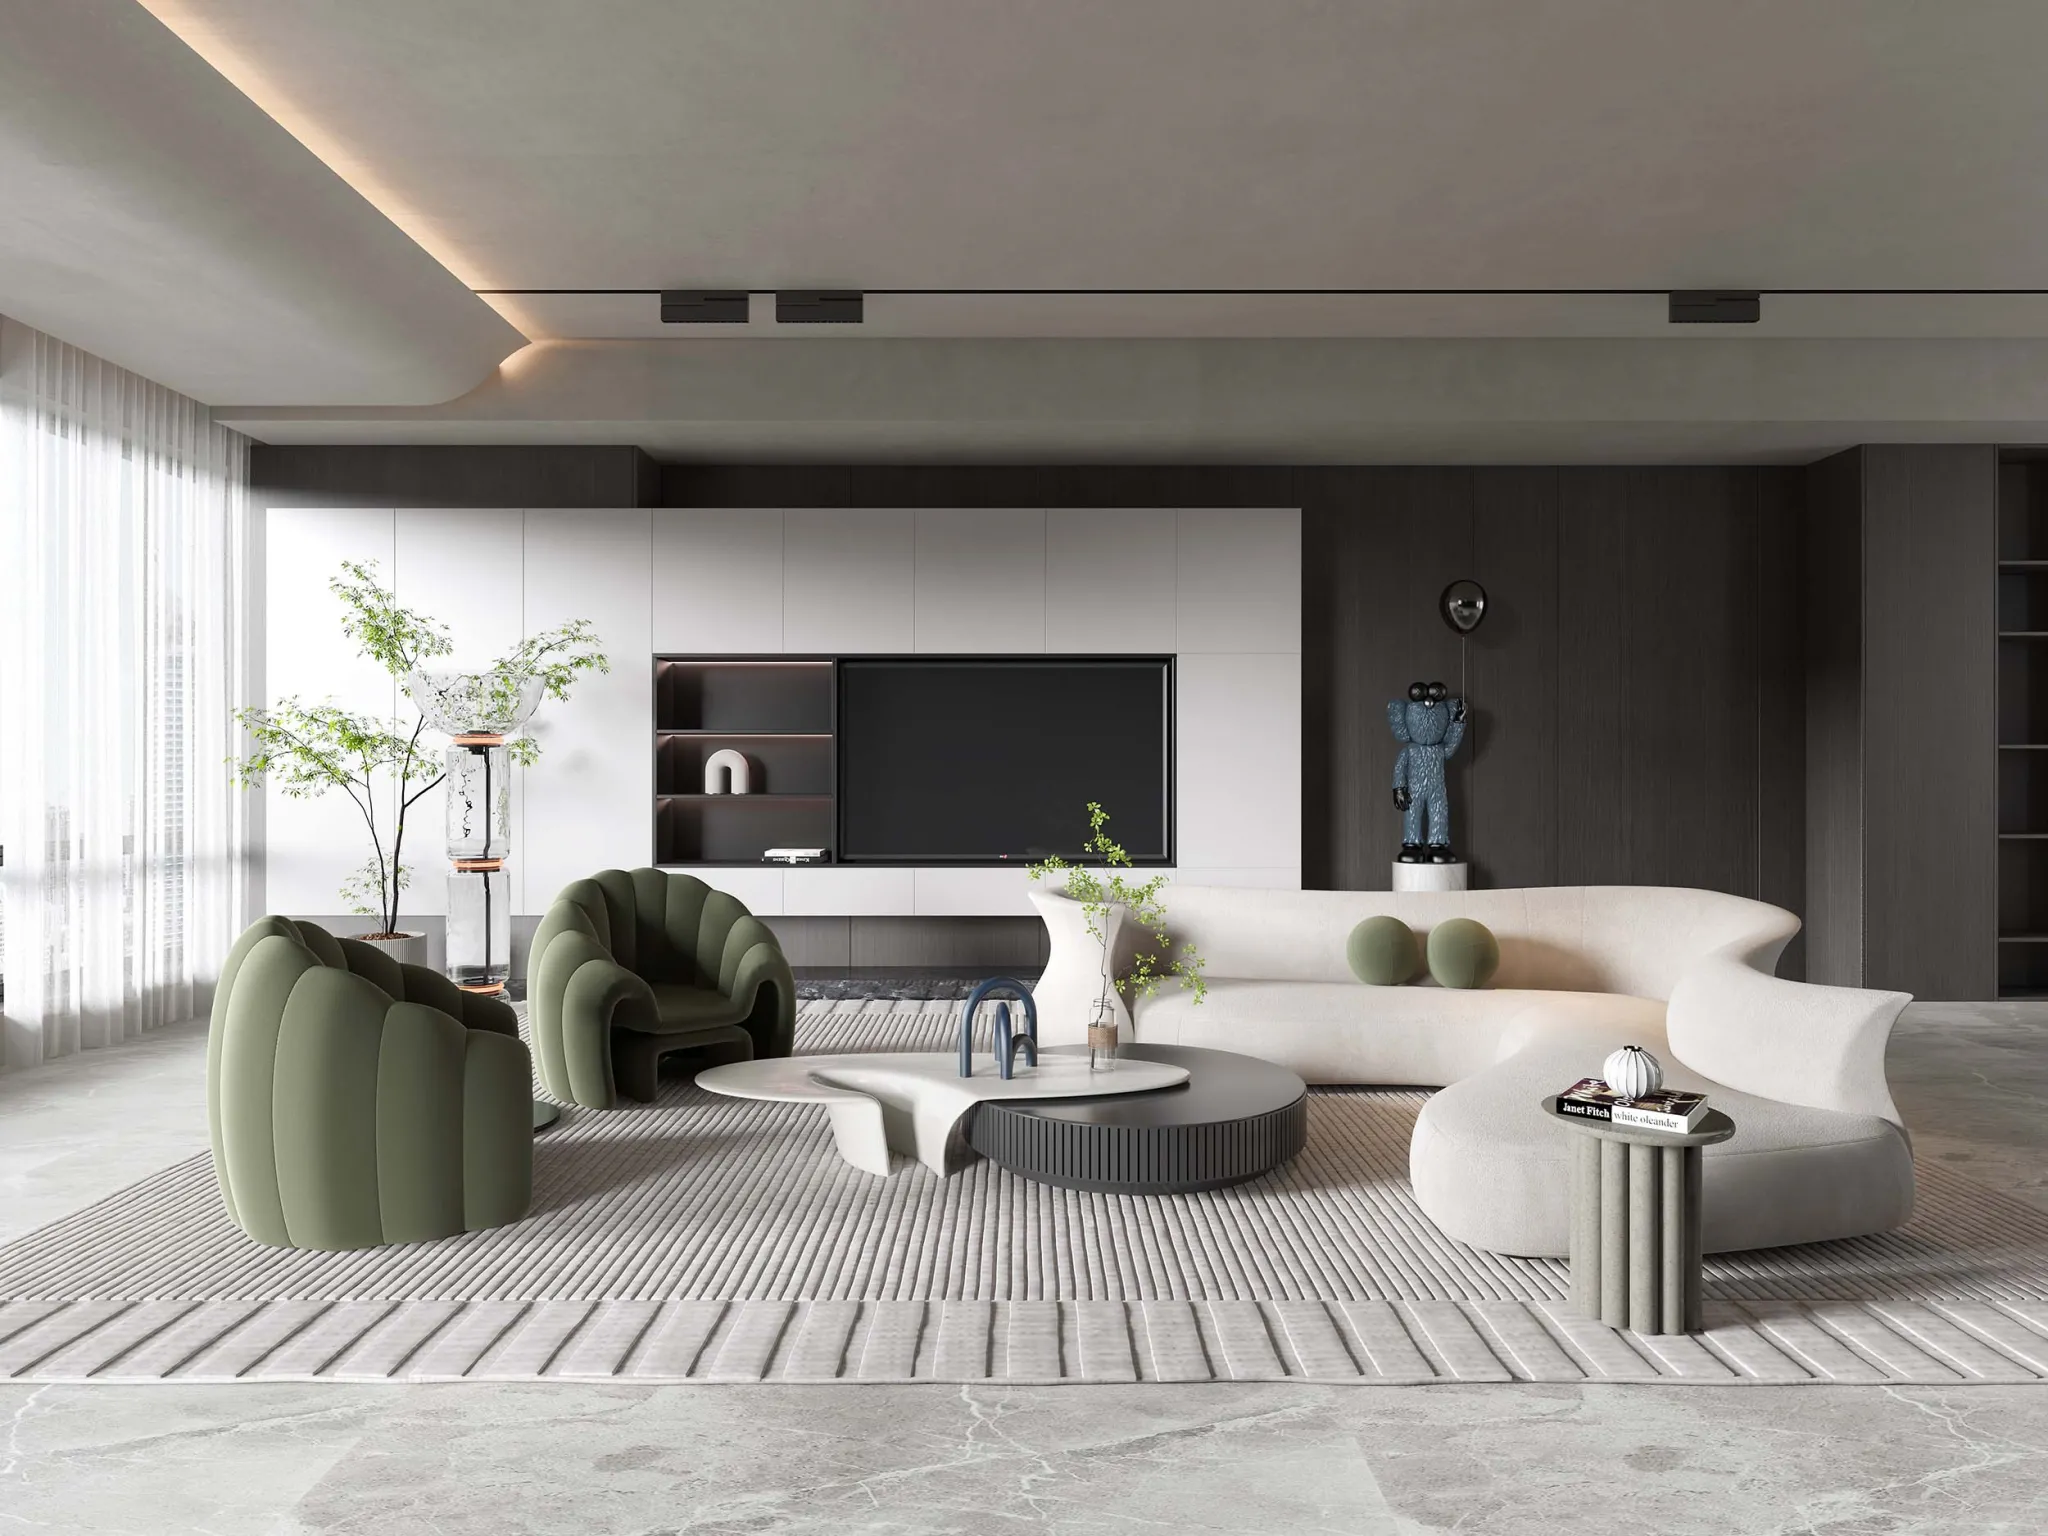 HOUSE SPACE 3D SCENES – LIVING ROOM – 0176